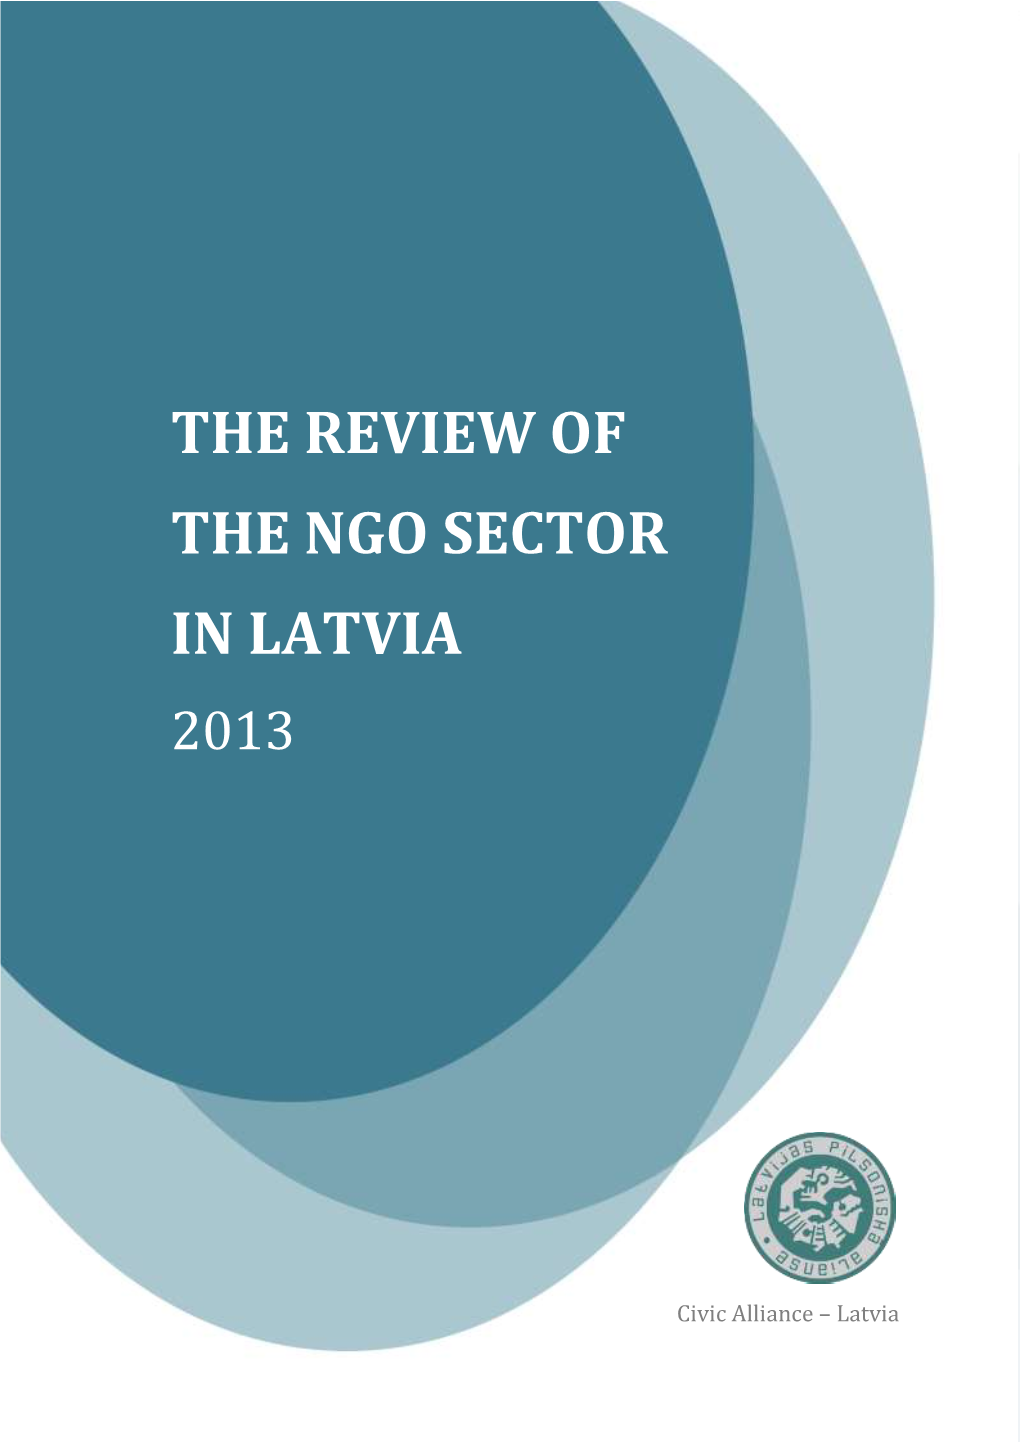 The Review of the Ngo Sector in Latvia 2013